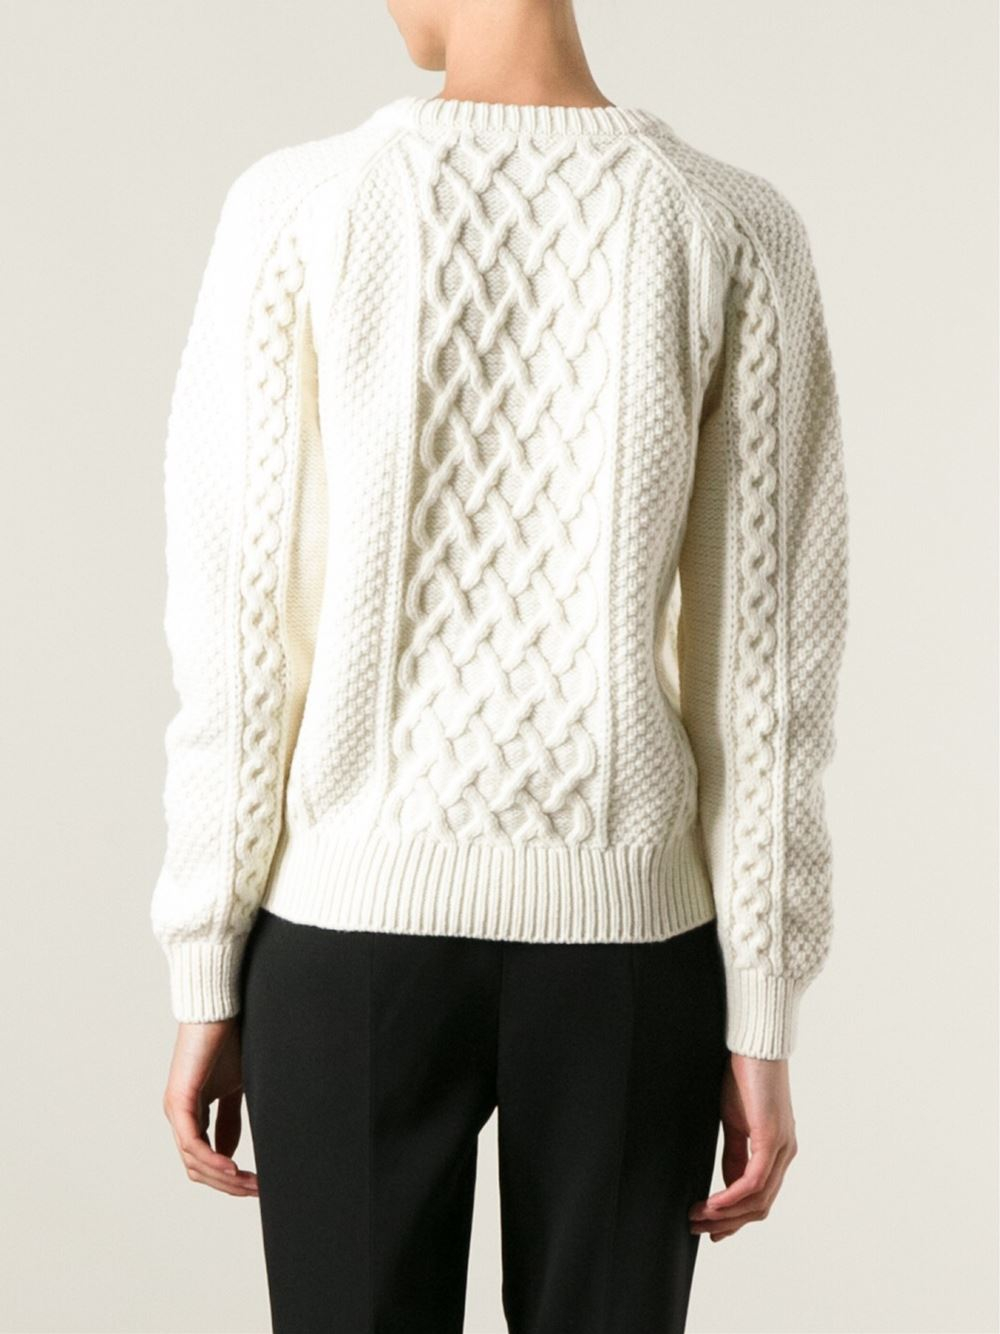 Alexander mcqueen Skull Cable Knit Sweater in White | Lyst